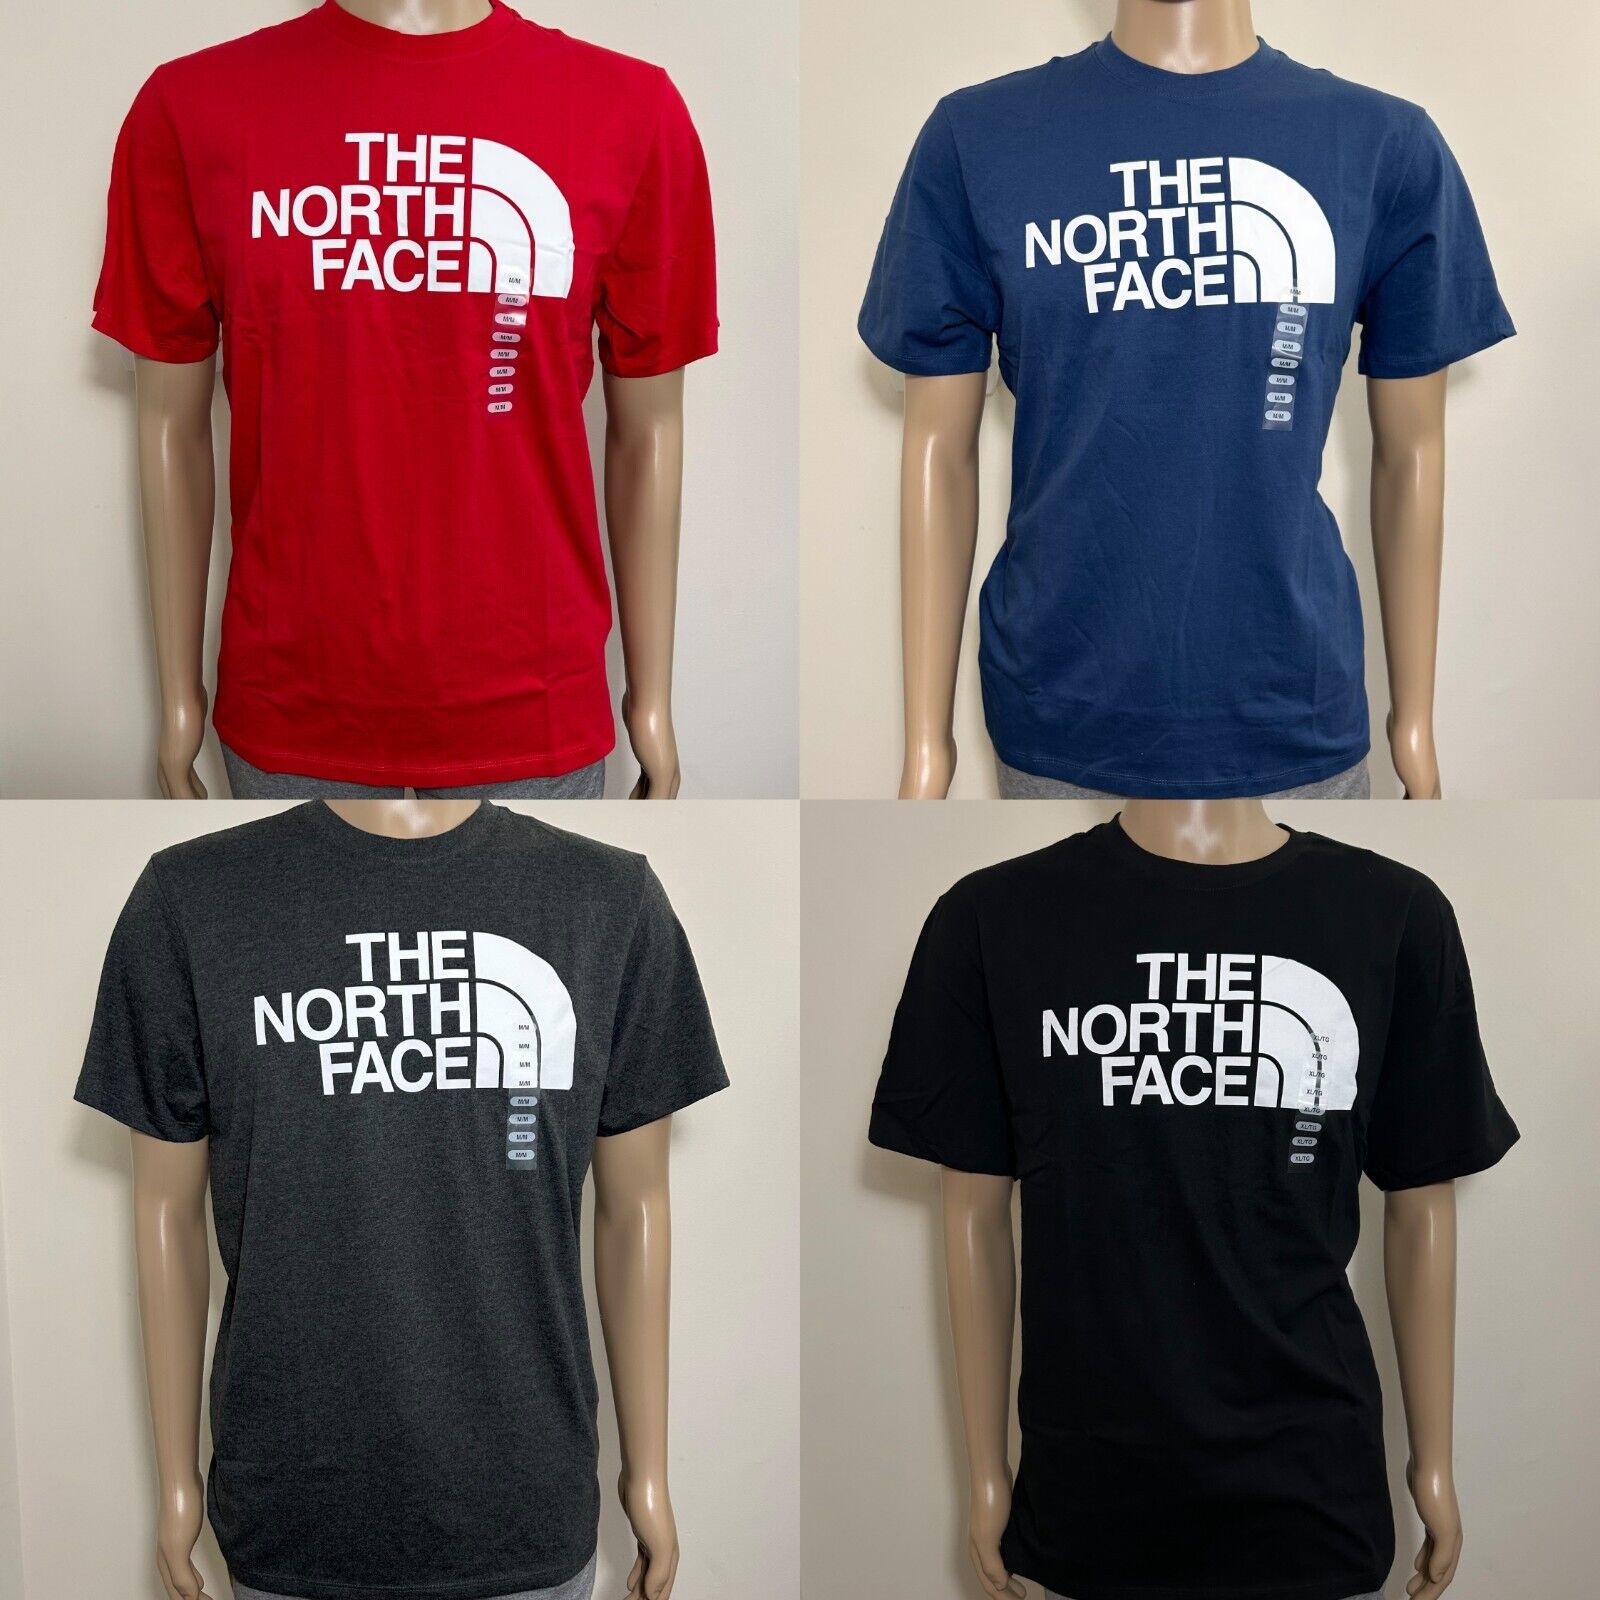 Primary image for The North Face Men's Half Dome Tee T-Shirt Red Blue Grey Black S M L XL XXL XXXL